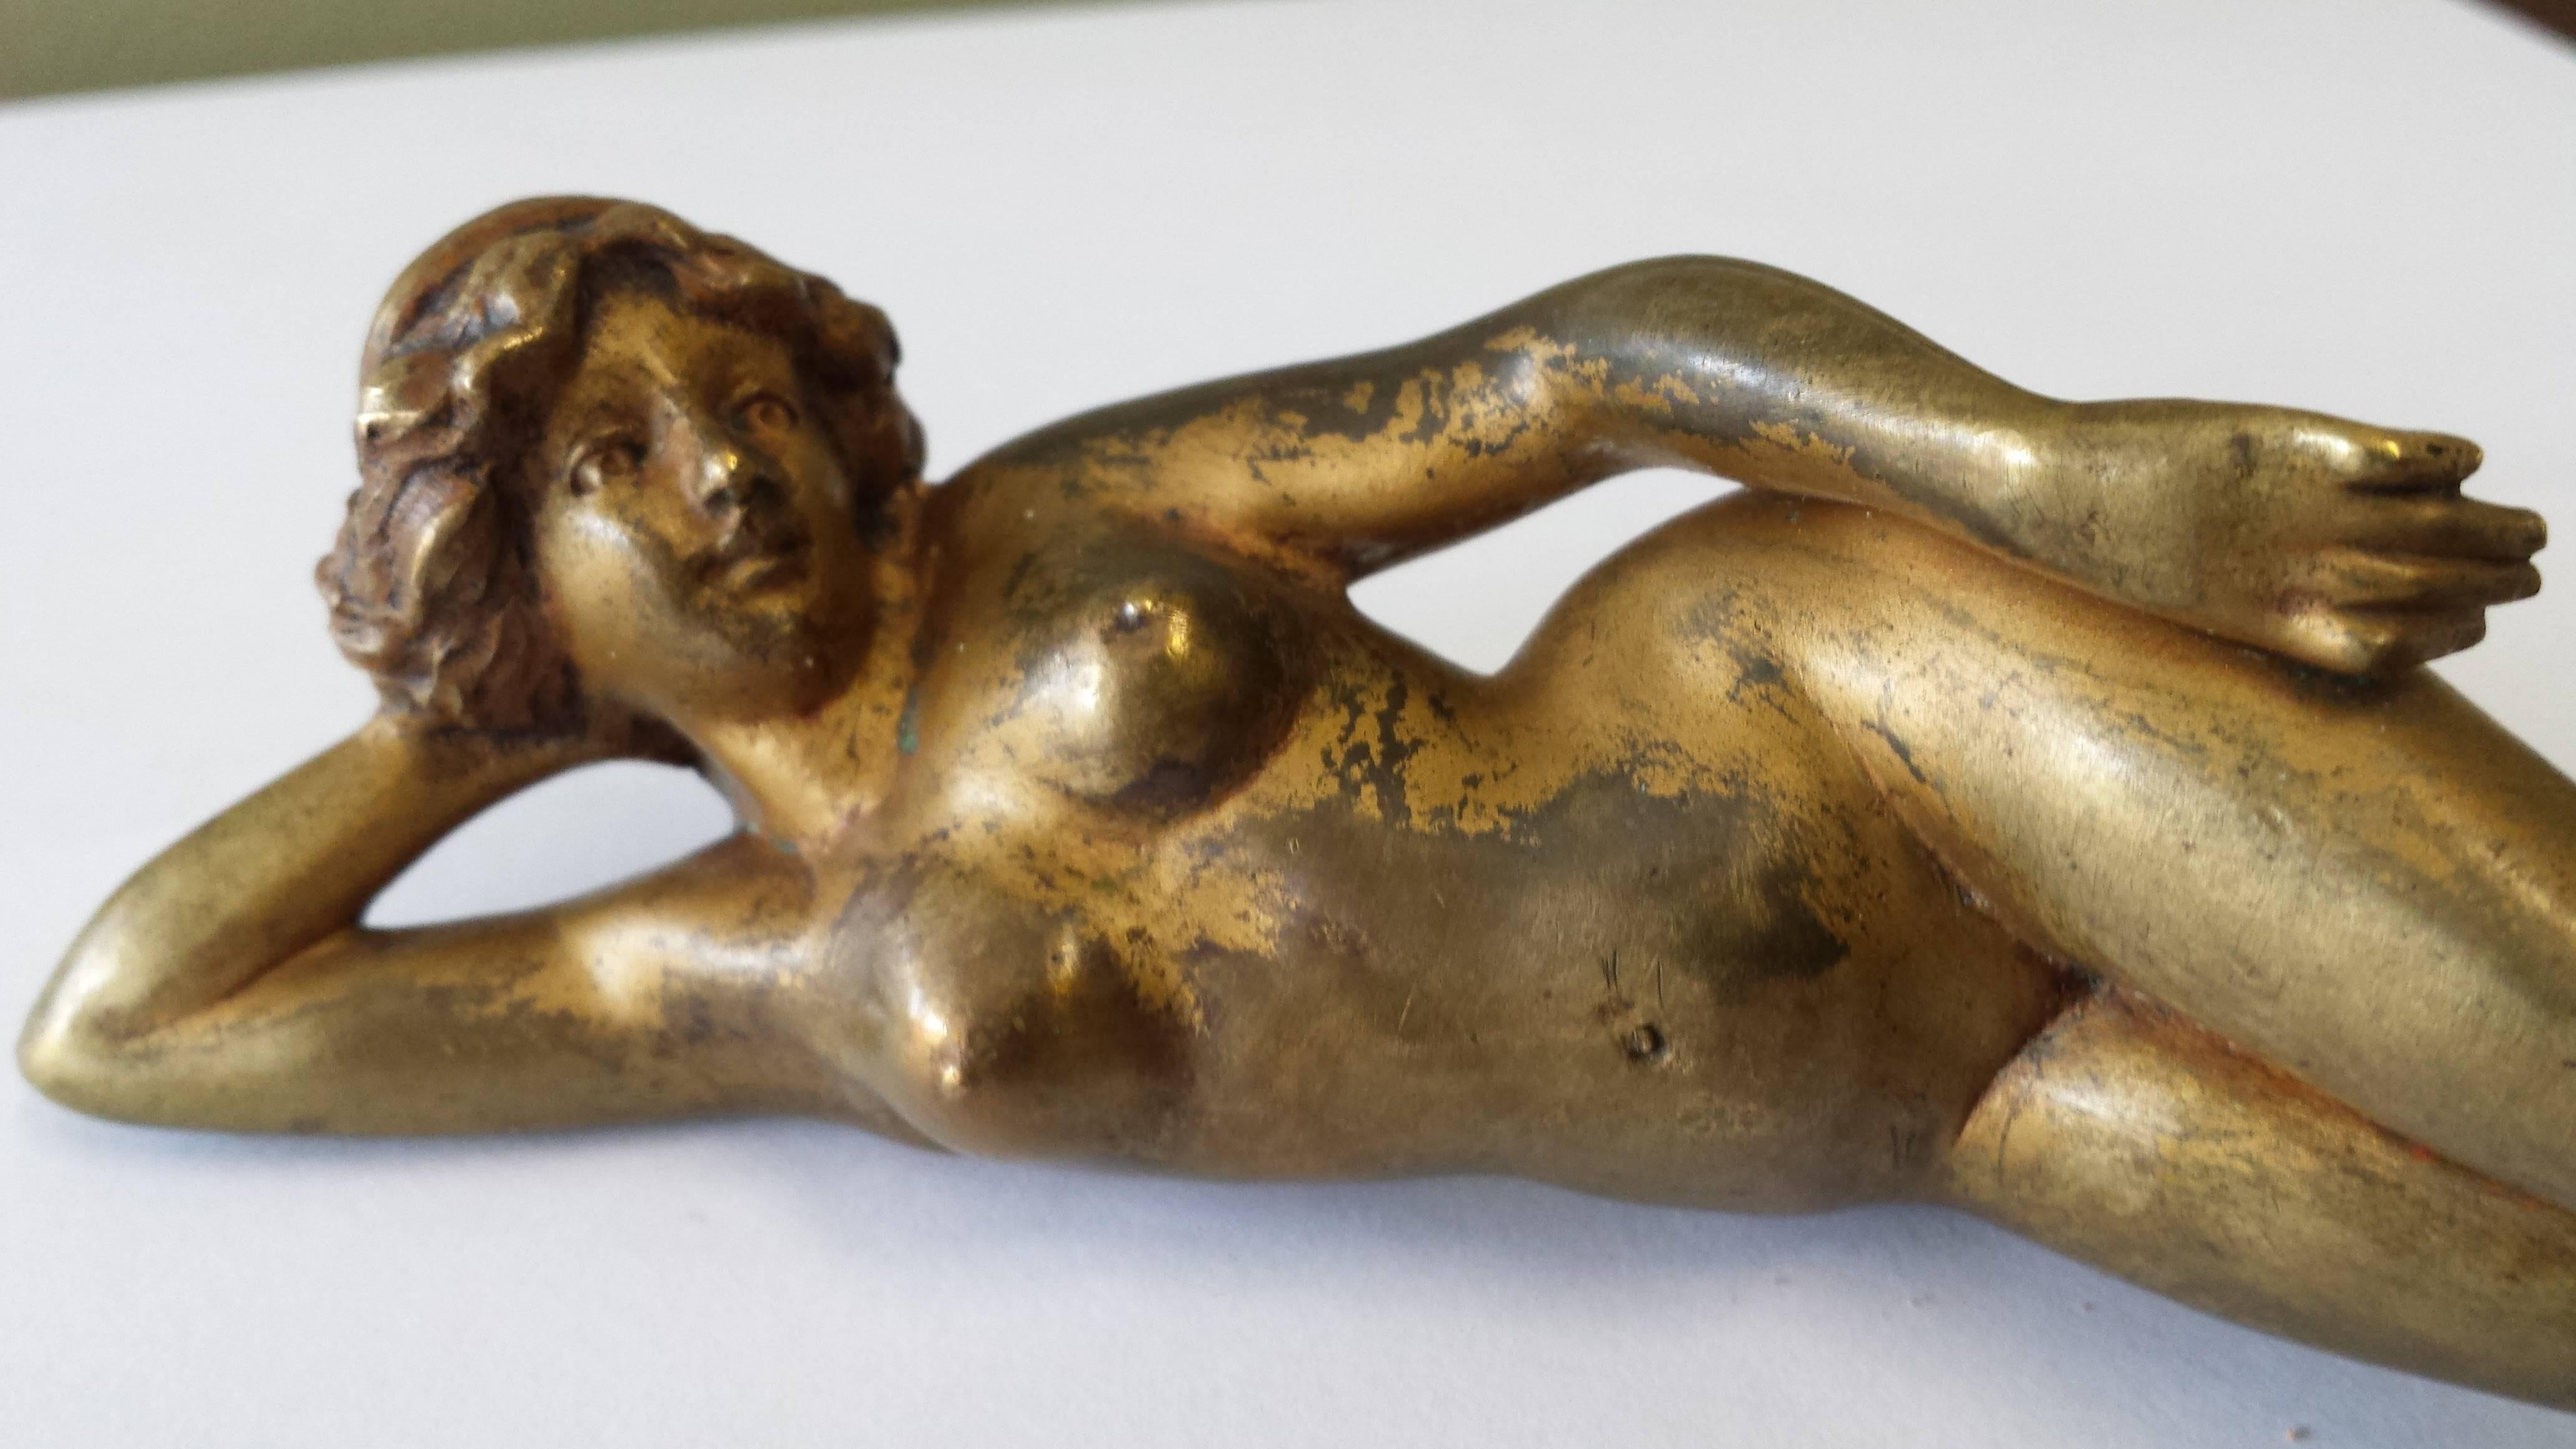 French gilt bronze figure of a reclining nude early 20th century, finally cast figure resting on her side. Gilt finish is worn, but retaining a nice color and patina. The figure is of very nice quality and stunning. The figure is circa 1900.
The